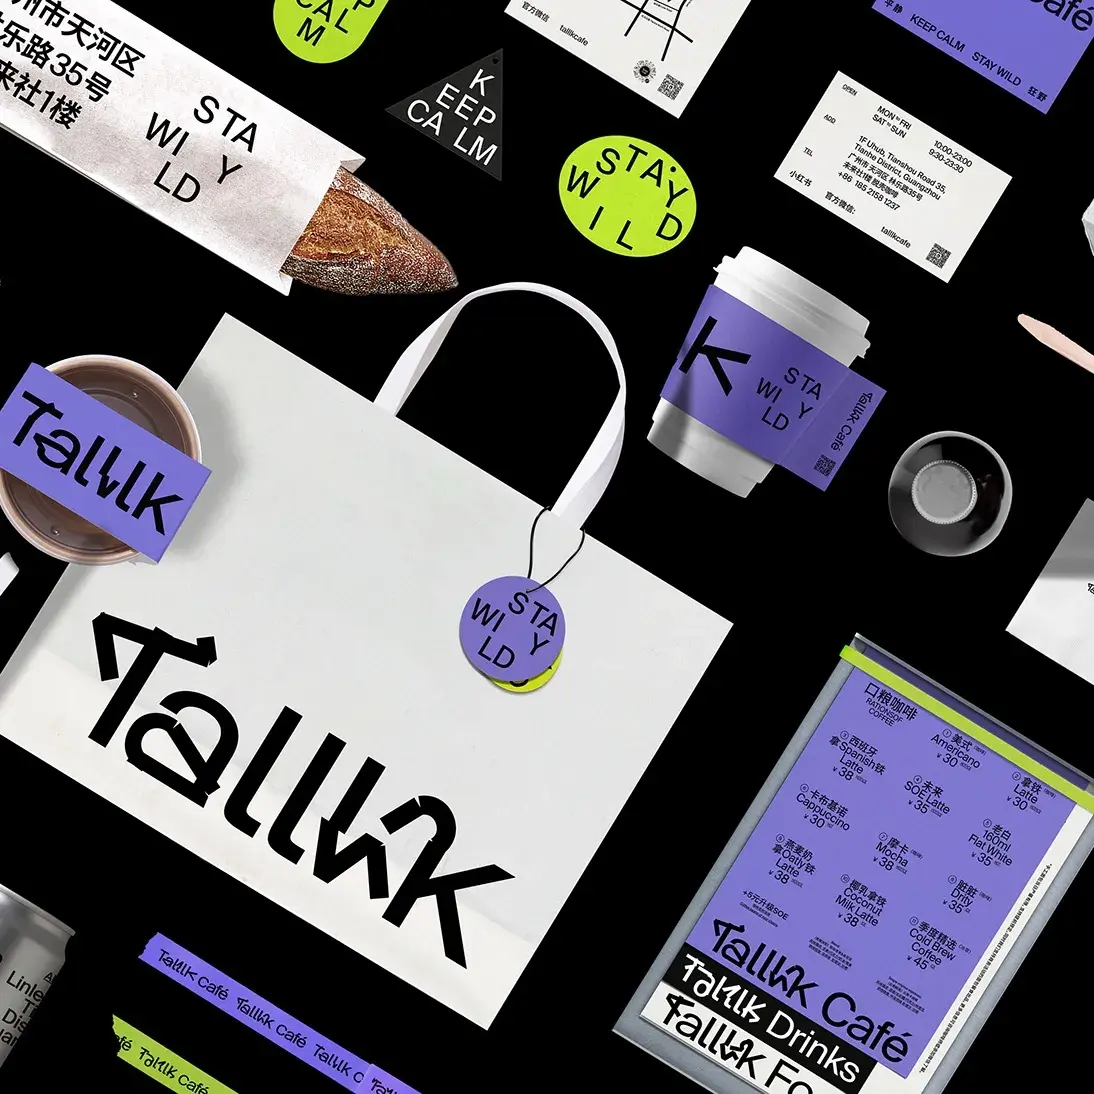 Talllk Café: Unifying Voices in Branding and Packaging Design